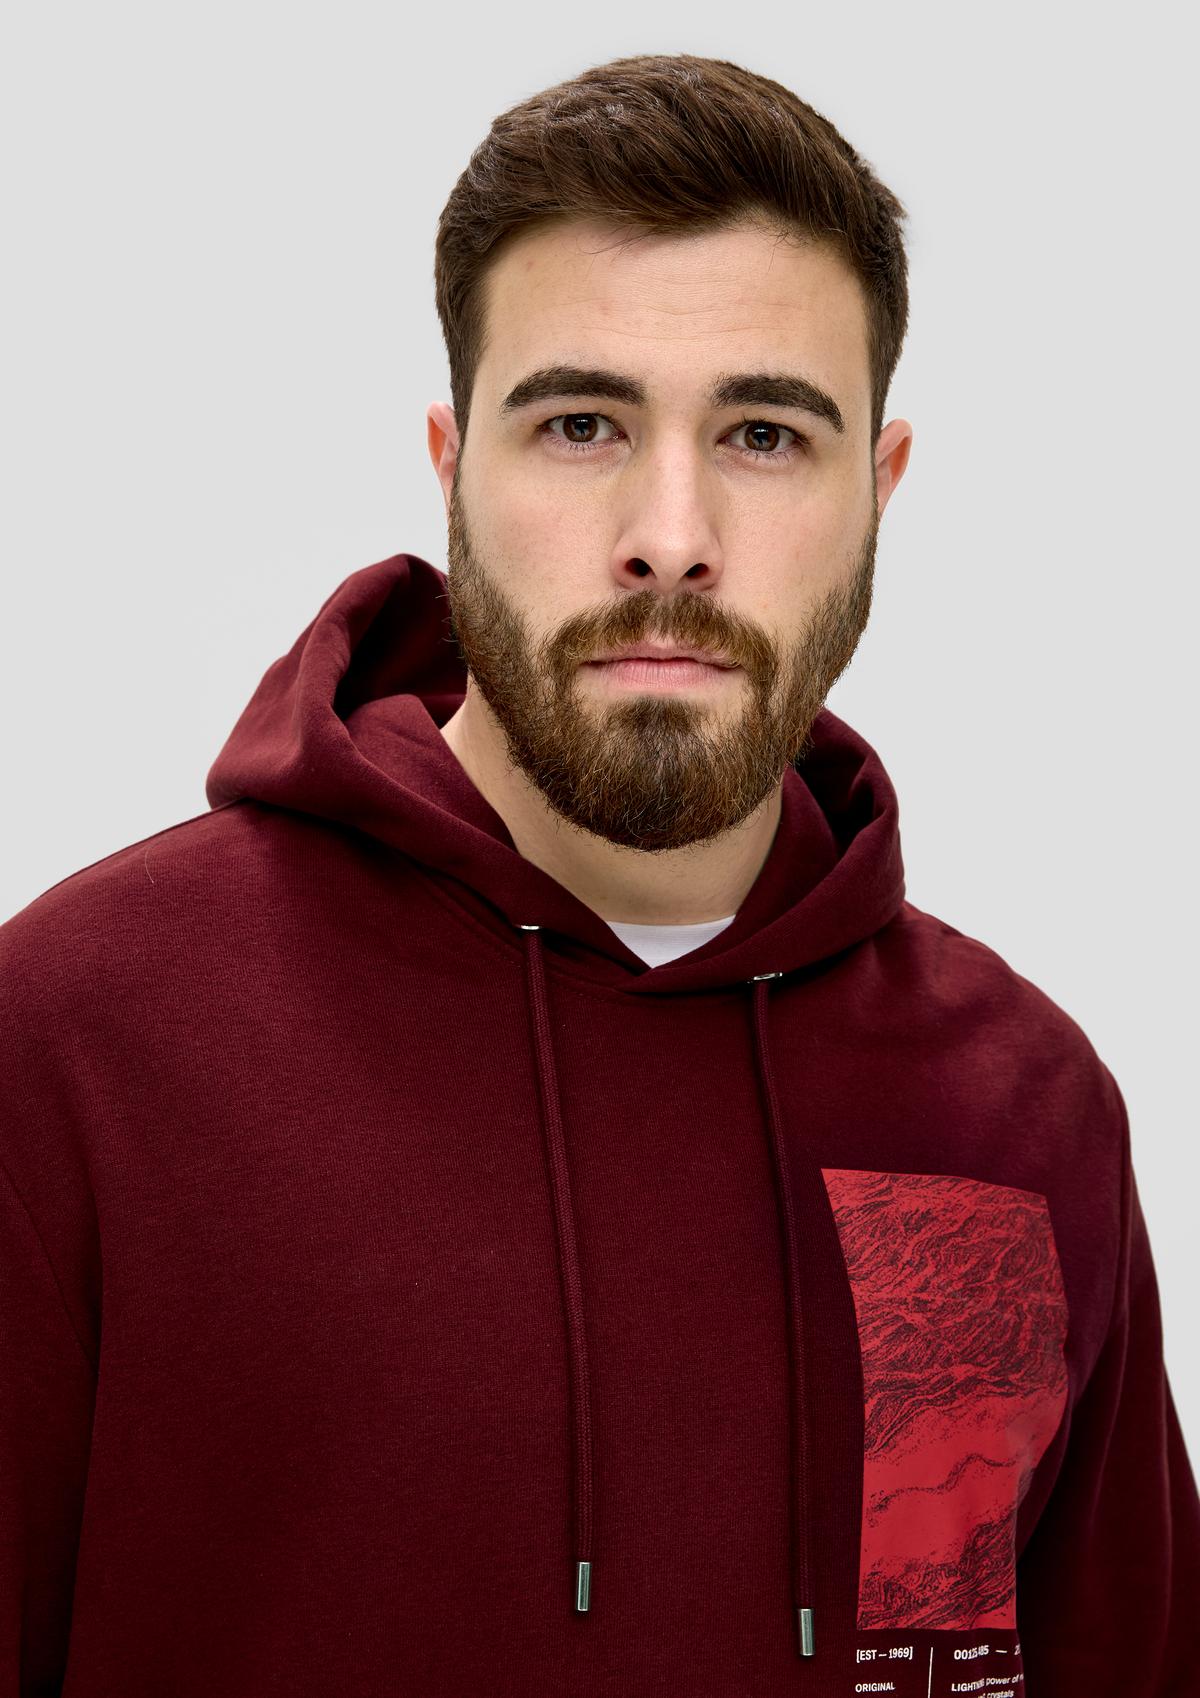 s.Oliver Hooded sweatshirt with a front print